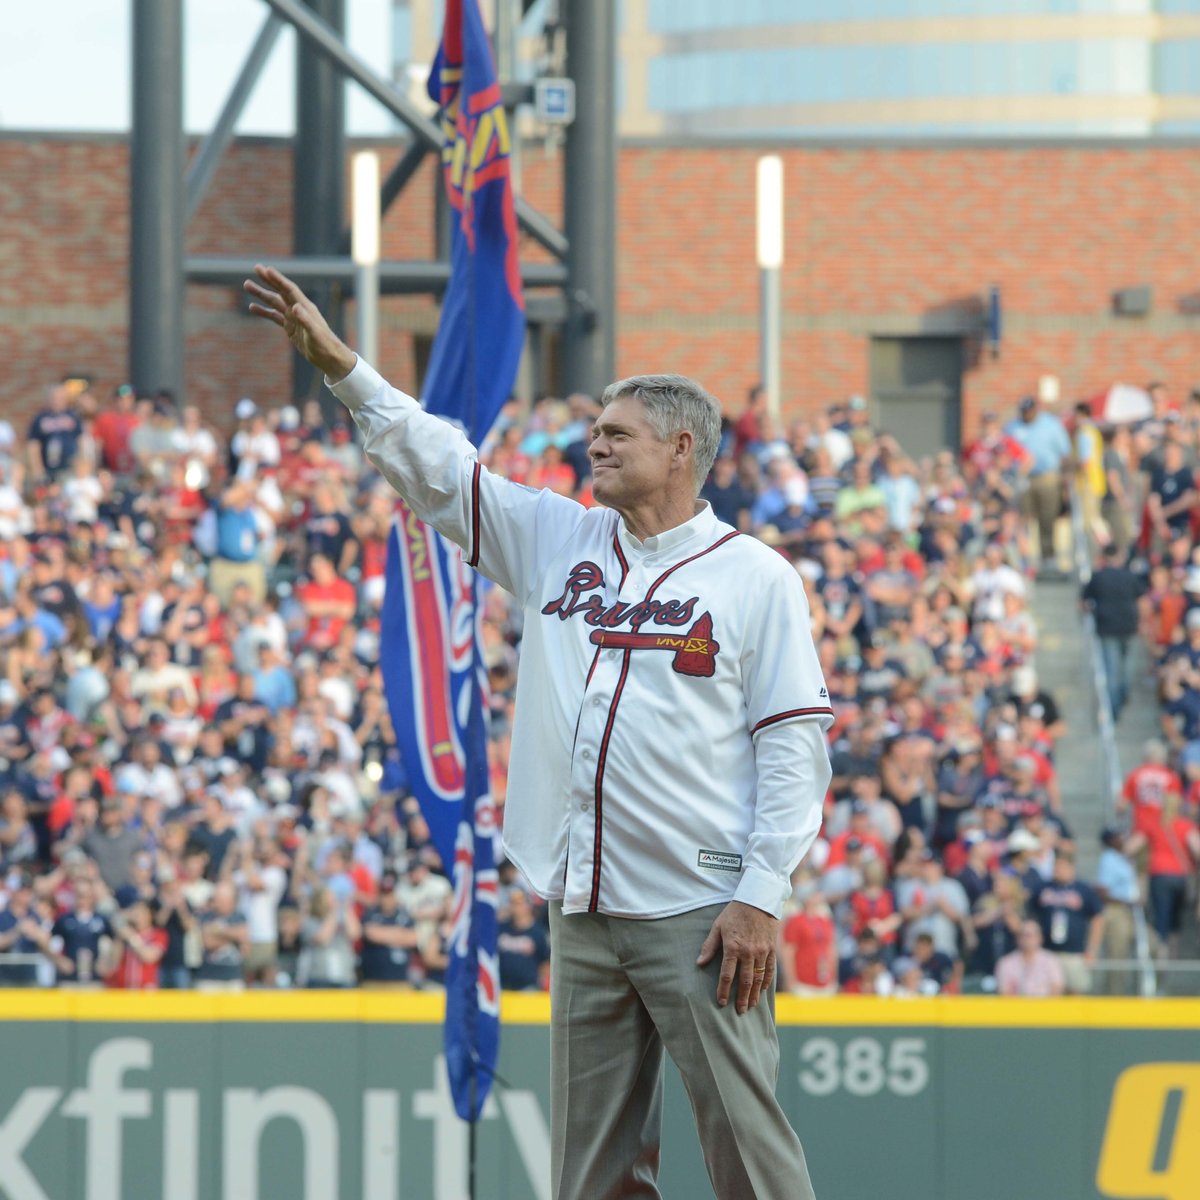 Where is Braves legend Dale Murphy now?